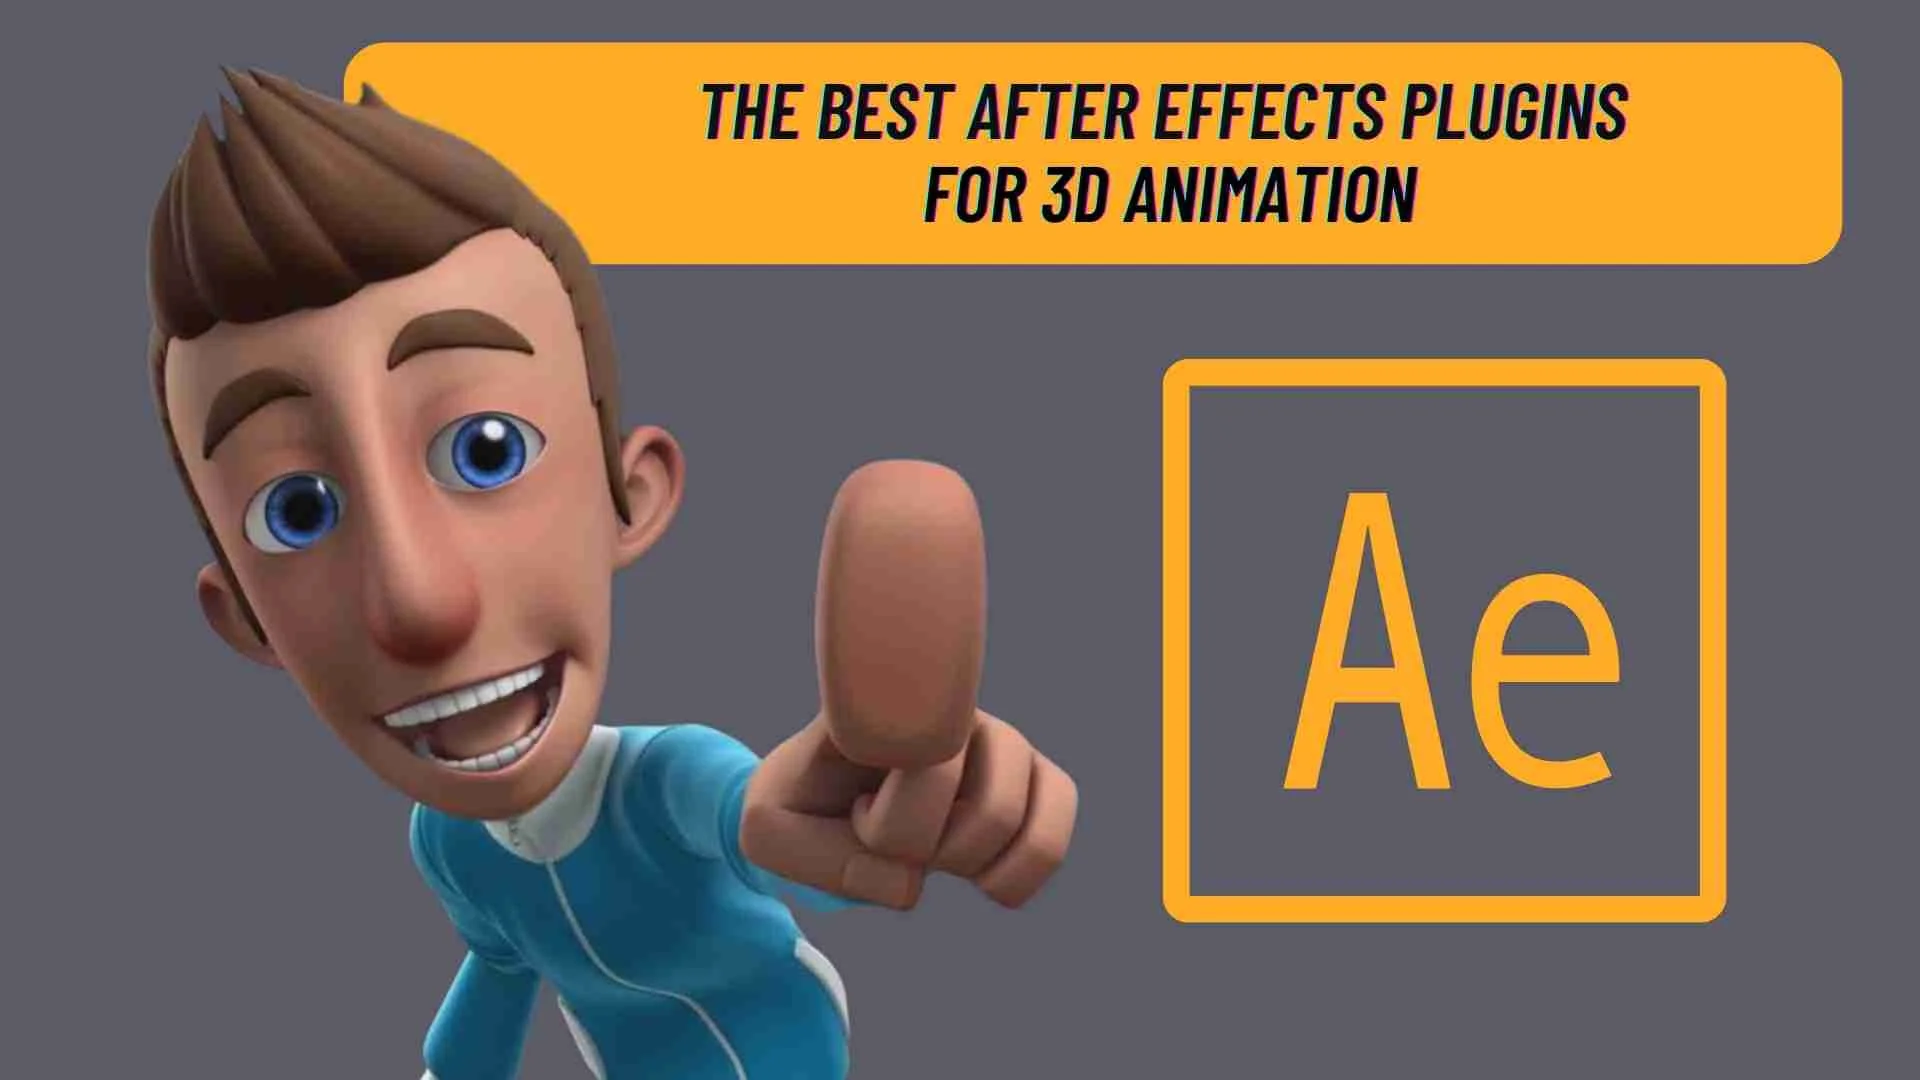 The Best After Effects Plugins for 3D Animation